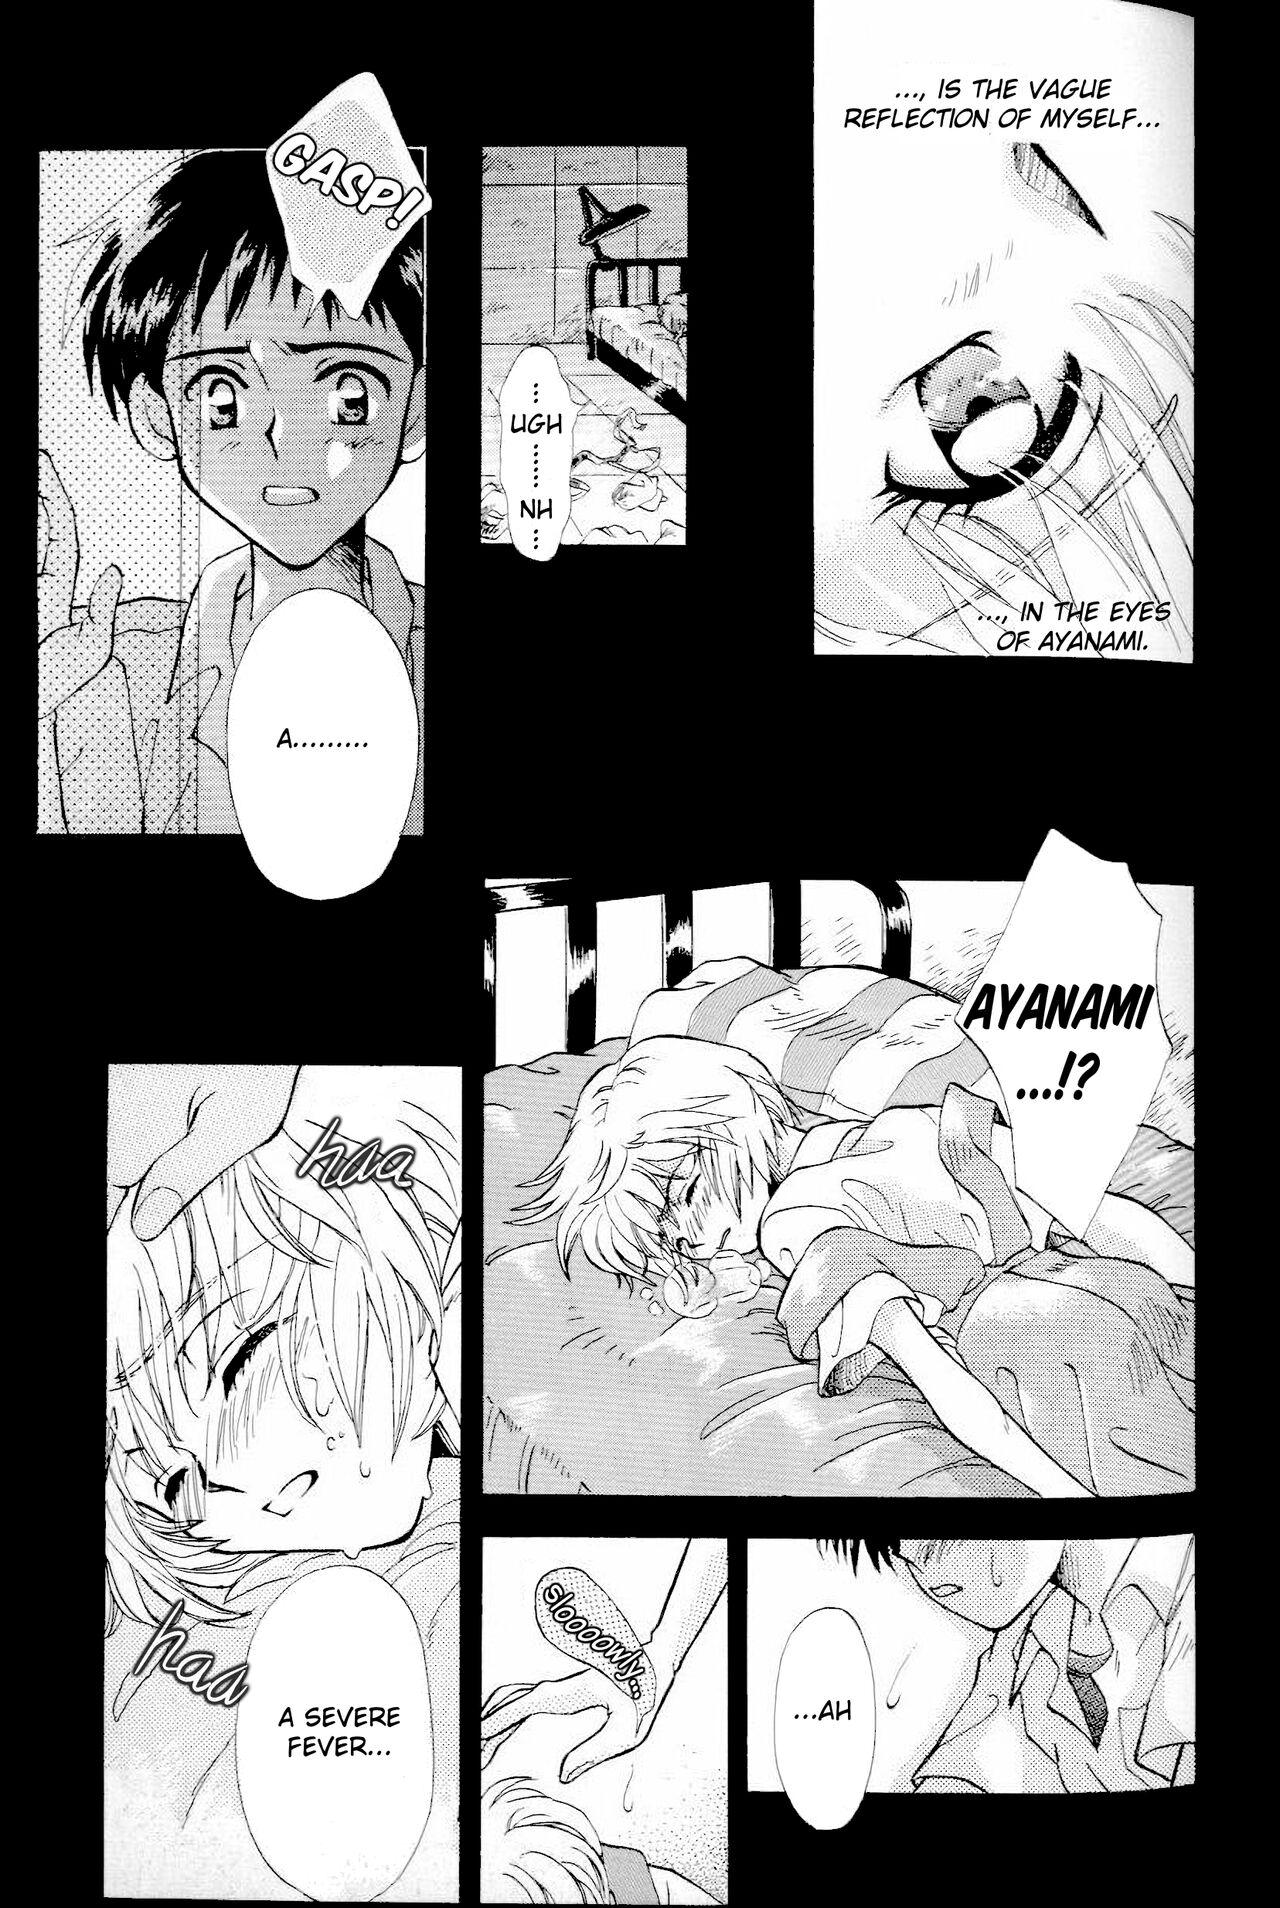 Sexteen How To Fly In The Sky - Please Be True Episode 0:1 - Neon genesis evangelion Dykes - Page 5